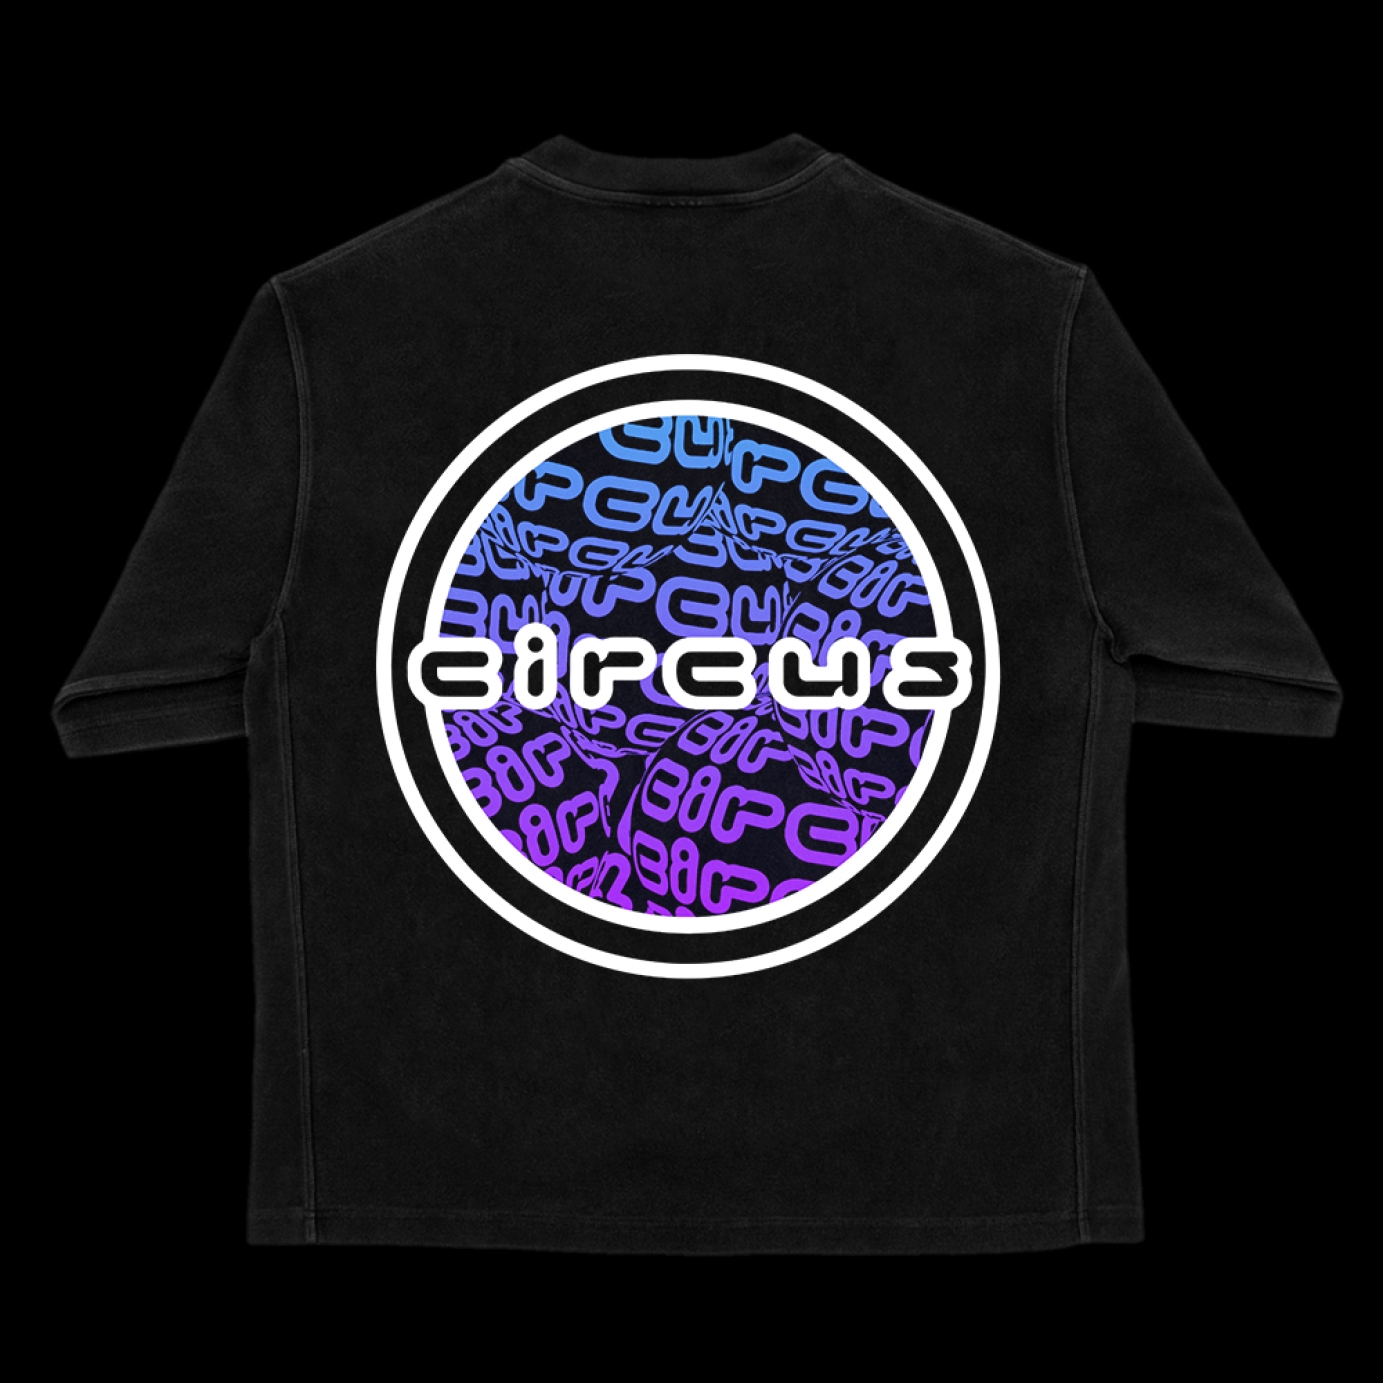 Merchandise for Circus Records